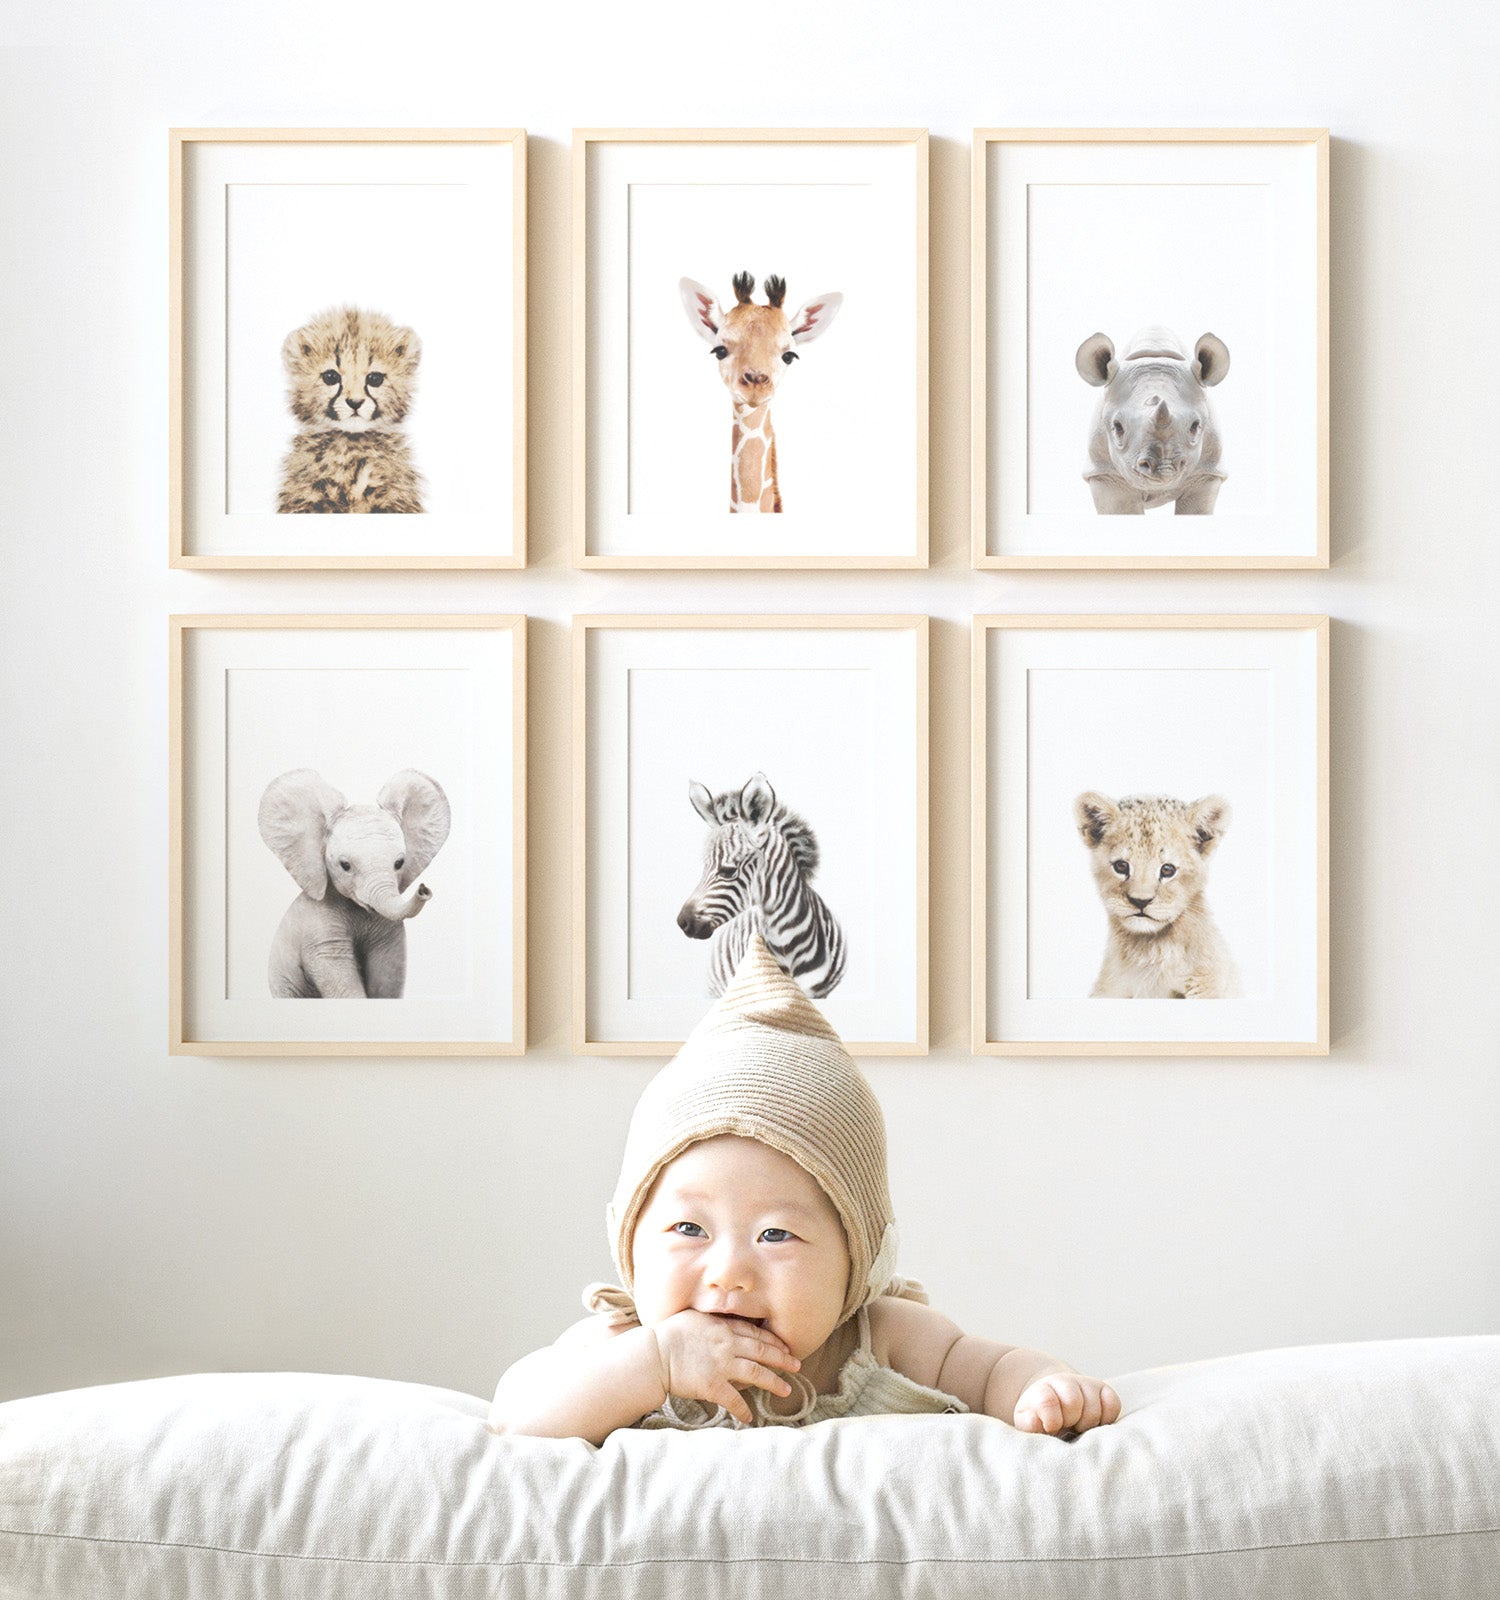 The Best Sites to Shop for Nursery Decor - Brit + Co